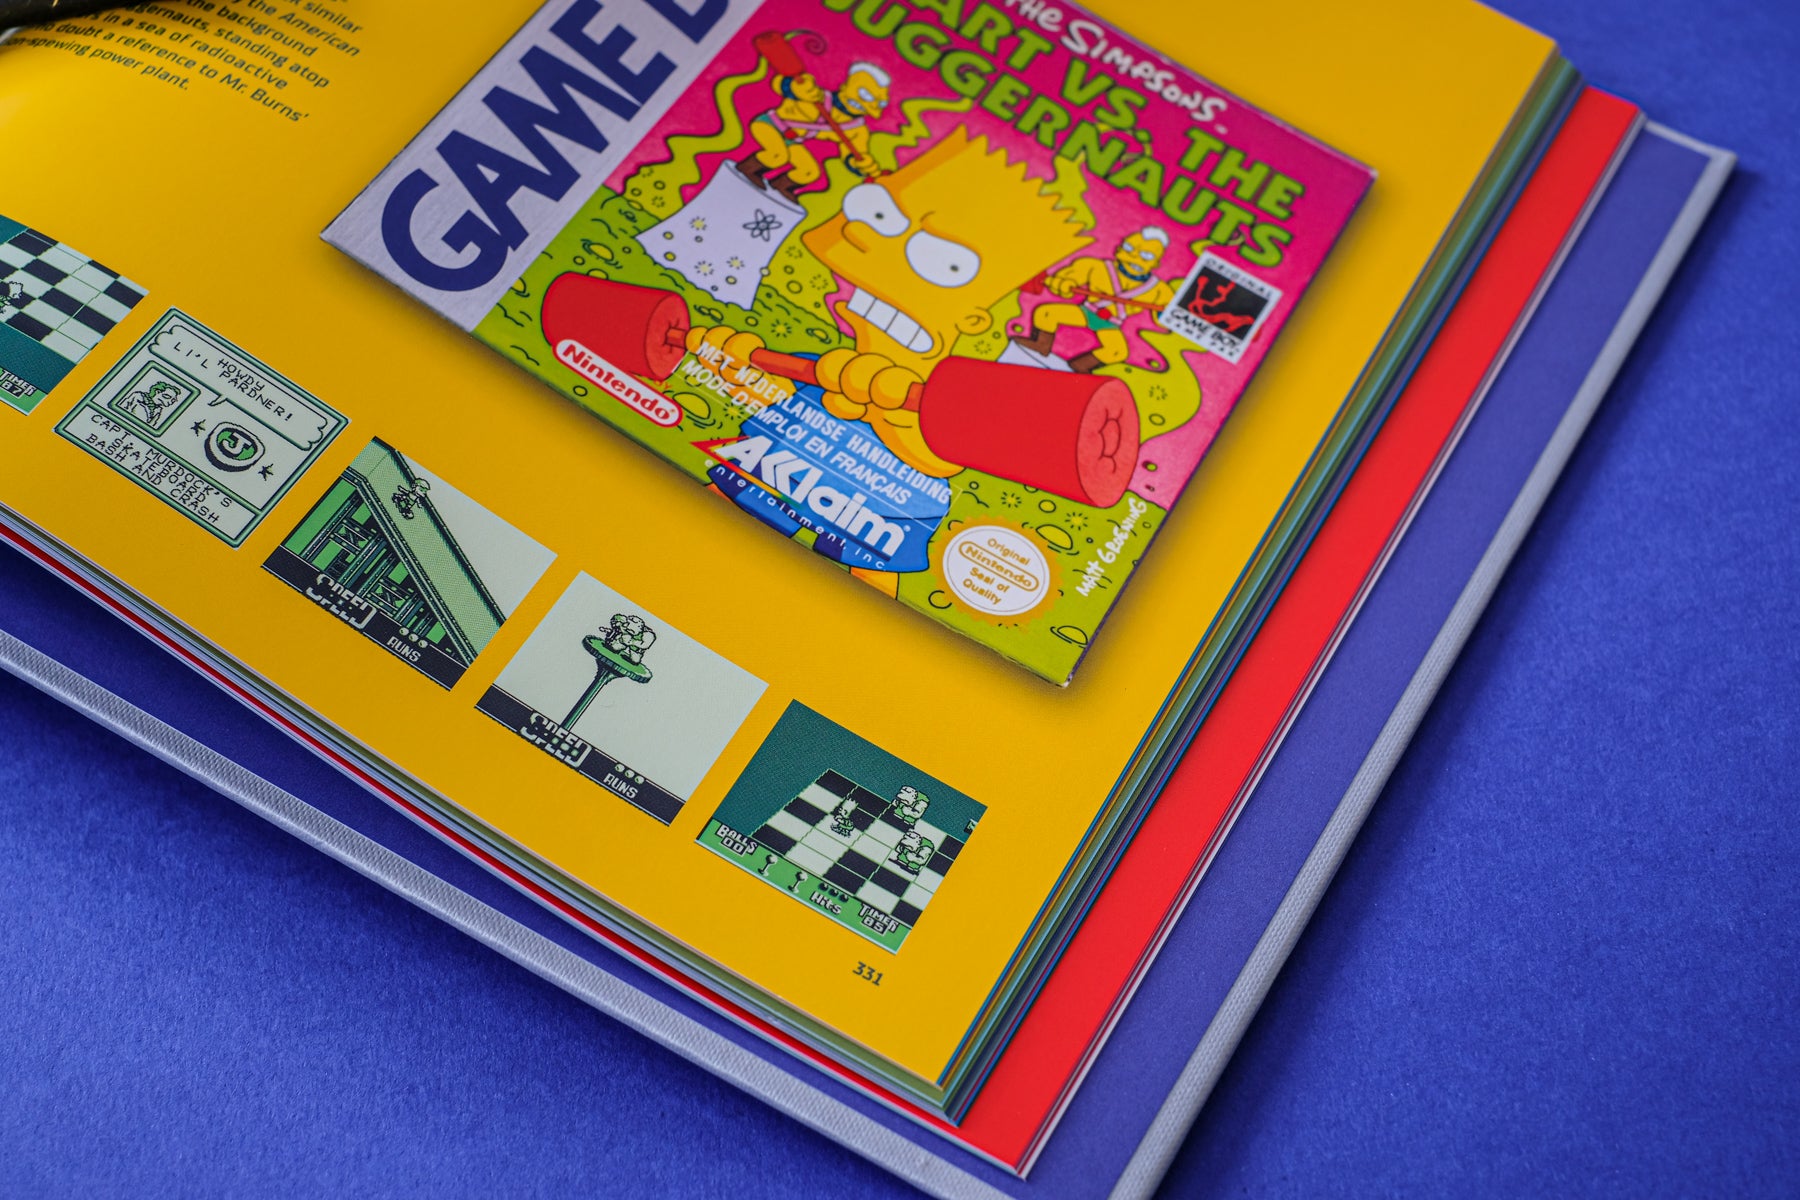 Game Boy: The Box Art Collection - Nintendo game covers